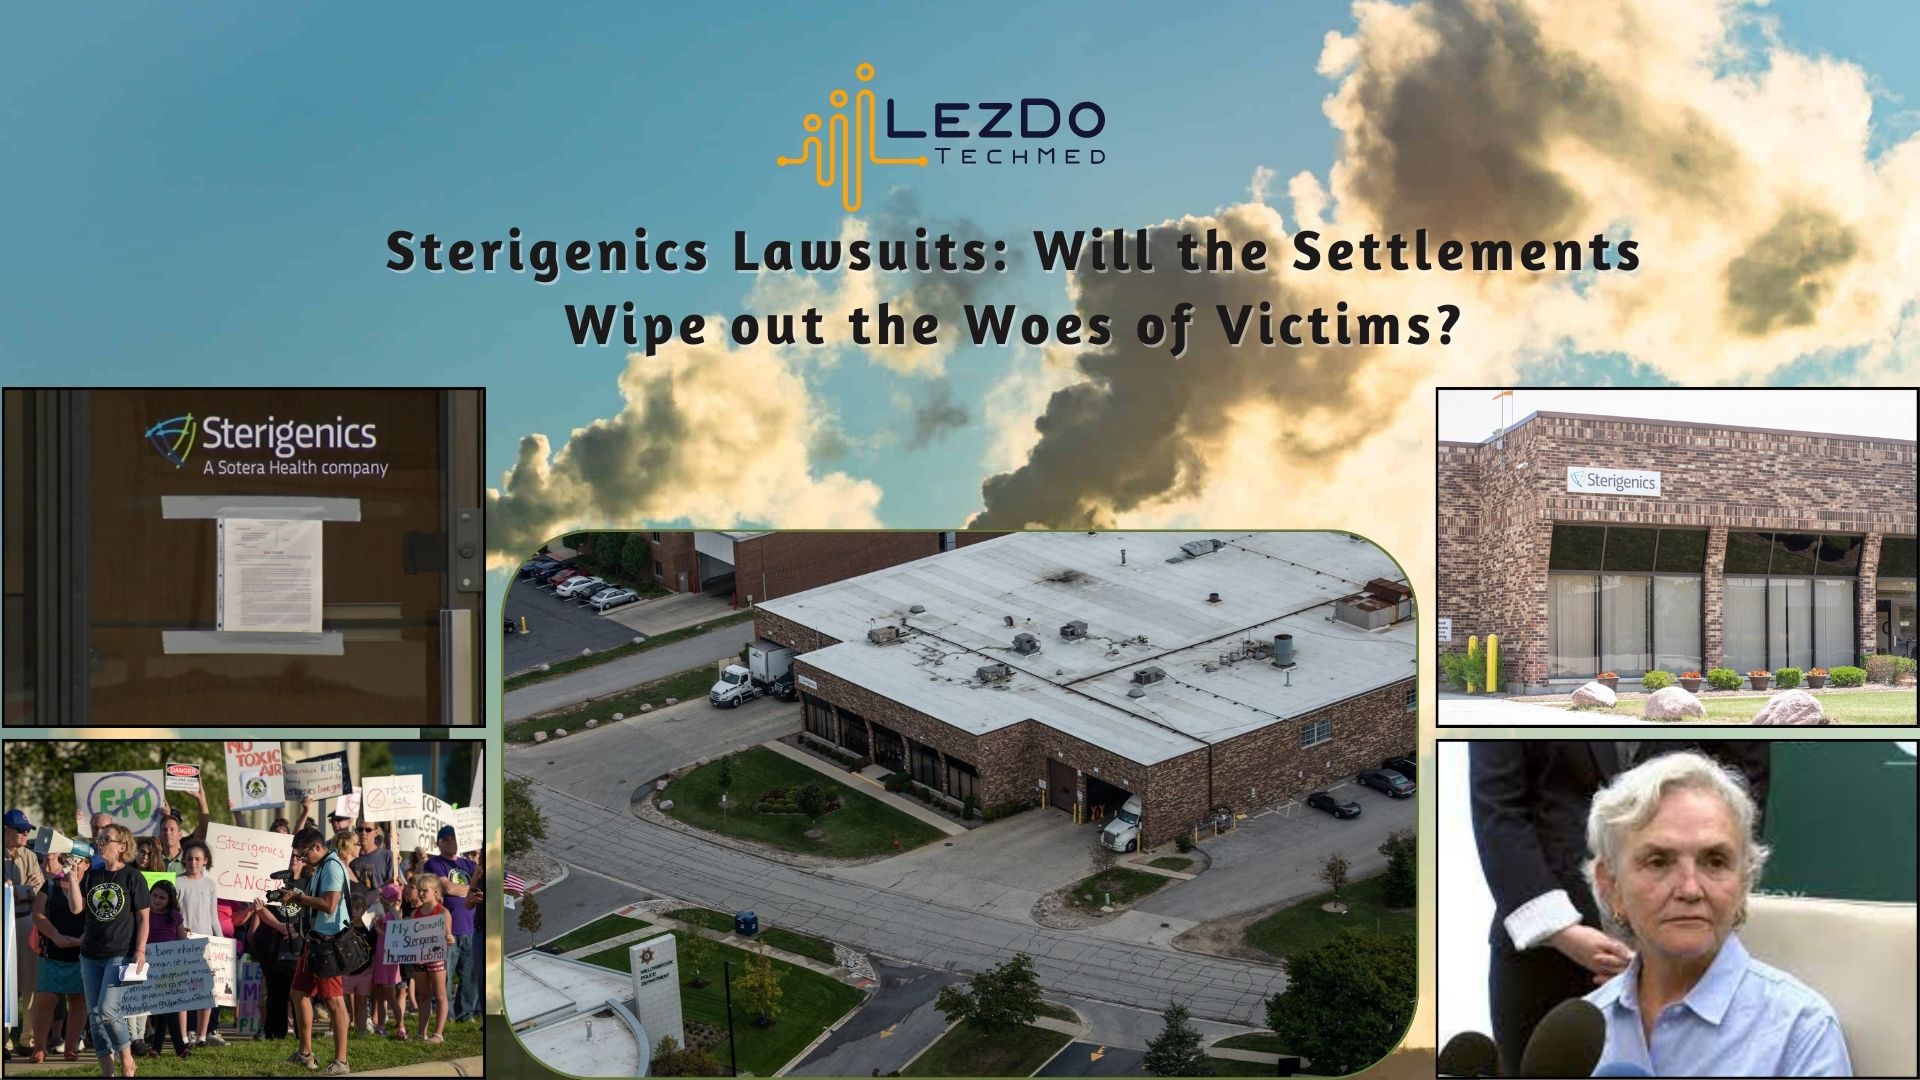 Sterigenics Lawsuits: Will the Settlements Wipe out the Woes of Victims?